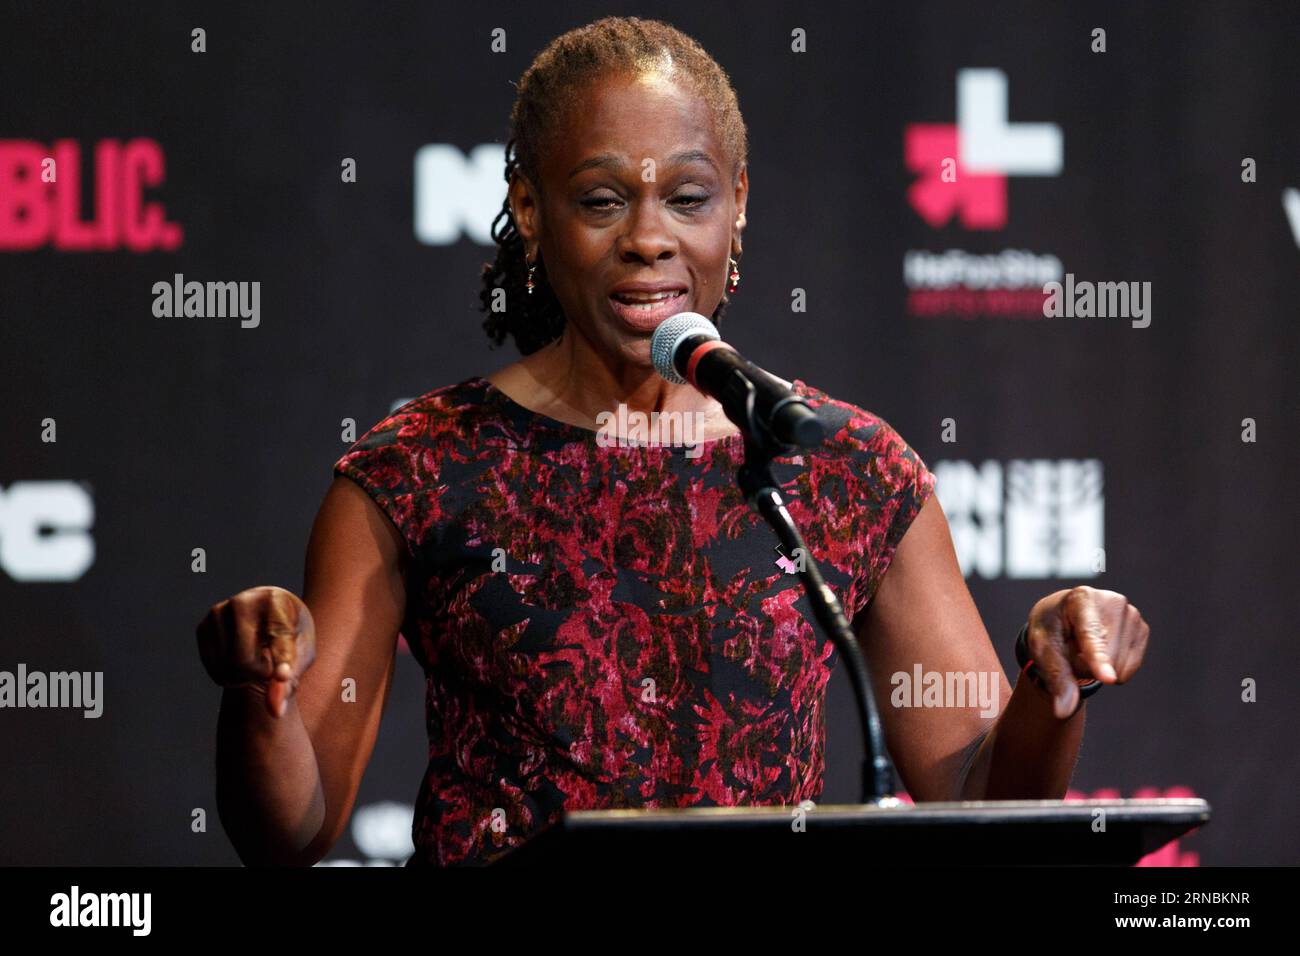 (160308) -- NEW YORK, March 8, 2016 -- First Lady of New York City Chirlane McCray speaks during the UN Women s HeForShe Arts Week Launch Event at the Public Theatre in New York, March 8, 2016. UN Women on Tuesday launched a new initiative -- HeForShe Arts Week -- across New York City to promote gender equality via arts.The event, which is meant to commemorate the International Women s Day that falls on Tuesday, will run from March 8-15. ) UN-NEW YORK-HEFORSHE-LAUNCH LixMuzi PUBLICATIONxNOTxINxCHN   New York March 8 2016 First Lady of New York City Chirlane McCray Speaks during The UN Women S Stock Photo